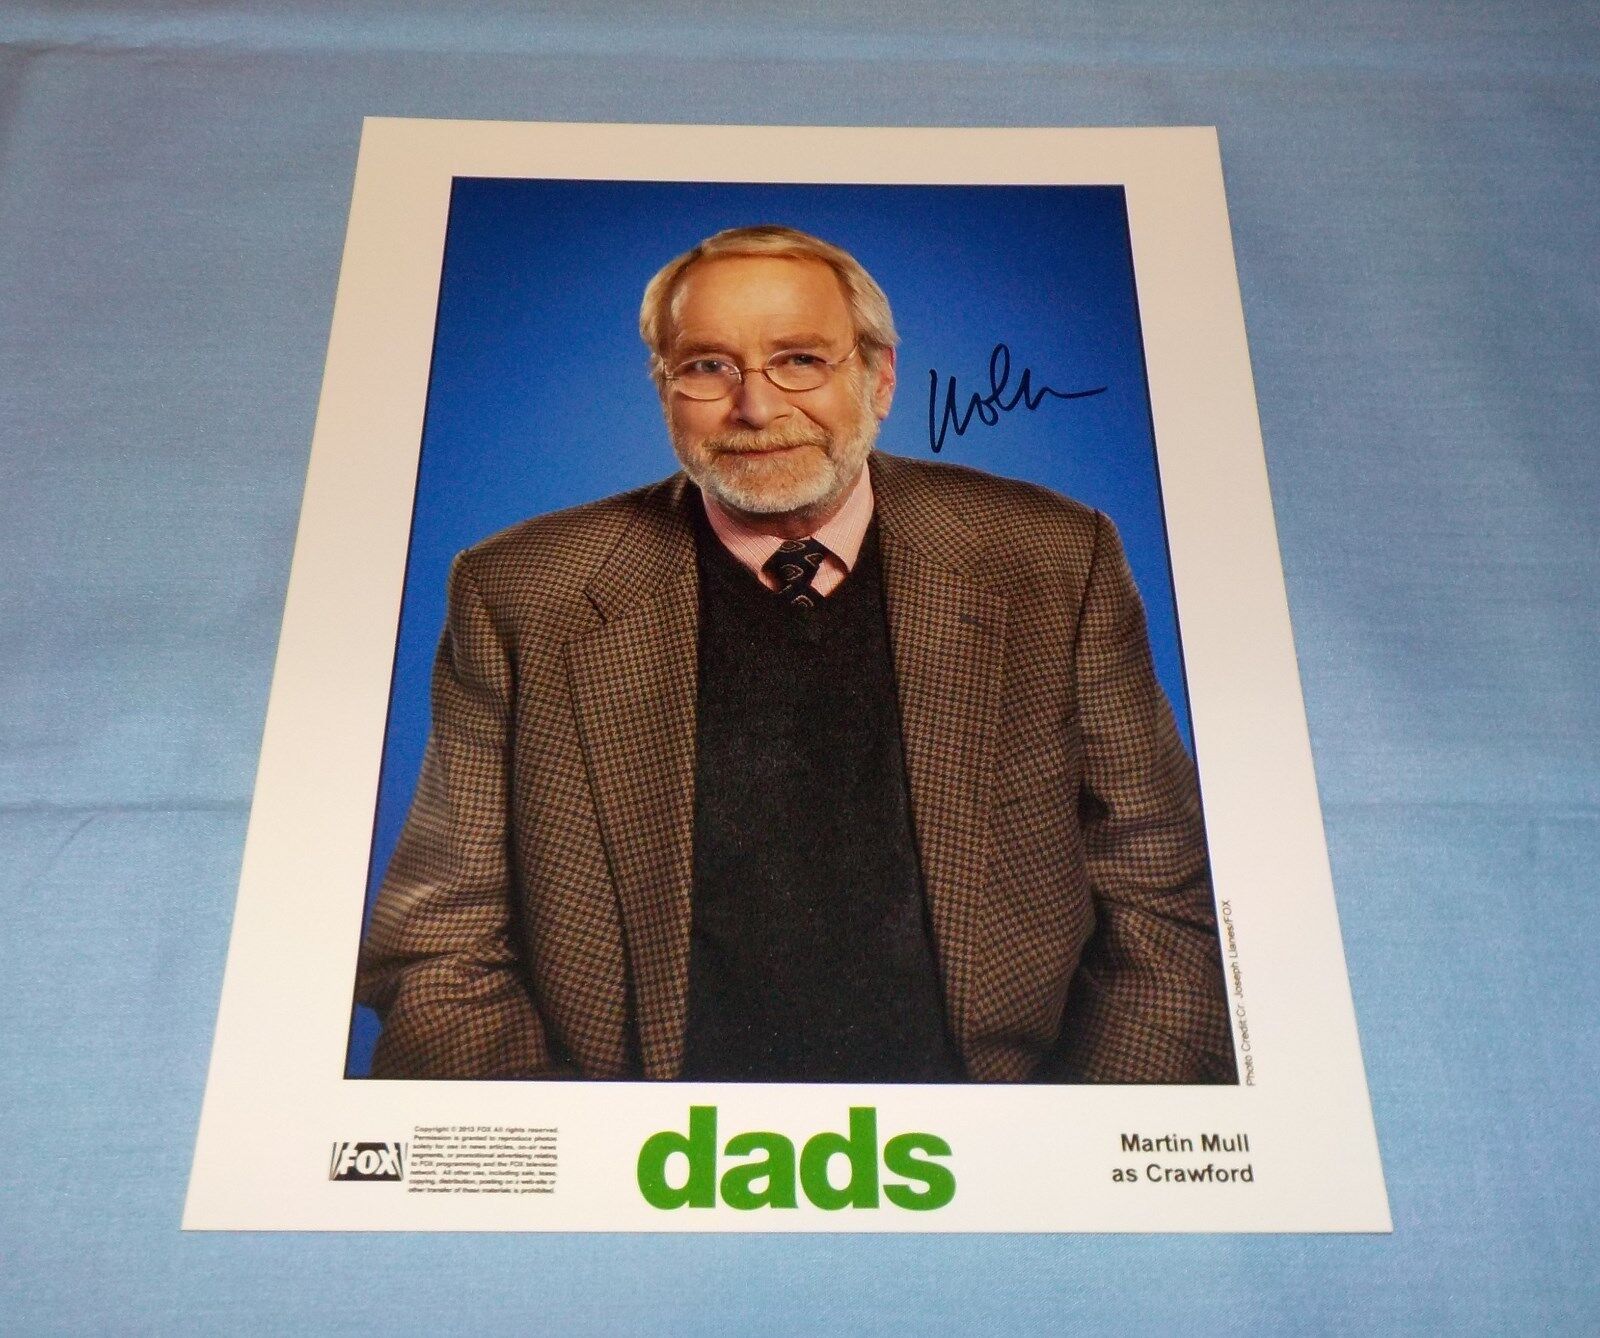 Martin Mull Signed Autographed 8x10 Photo Poster painting Actor Comedian Dads